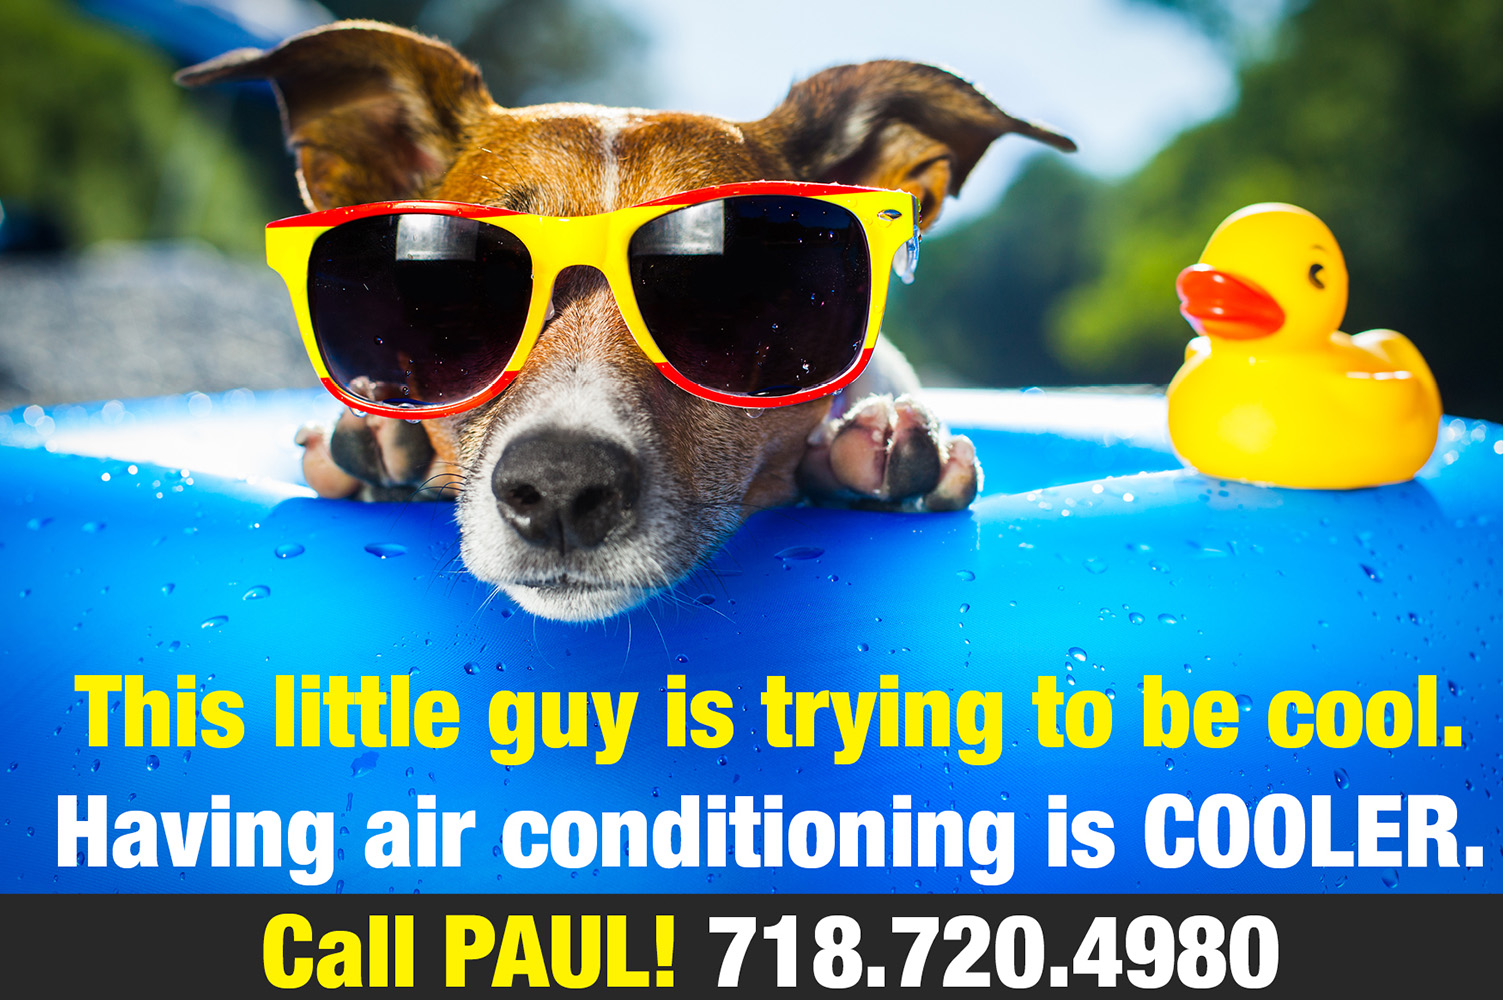 Post Card for an Air Conditioning Company